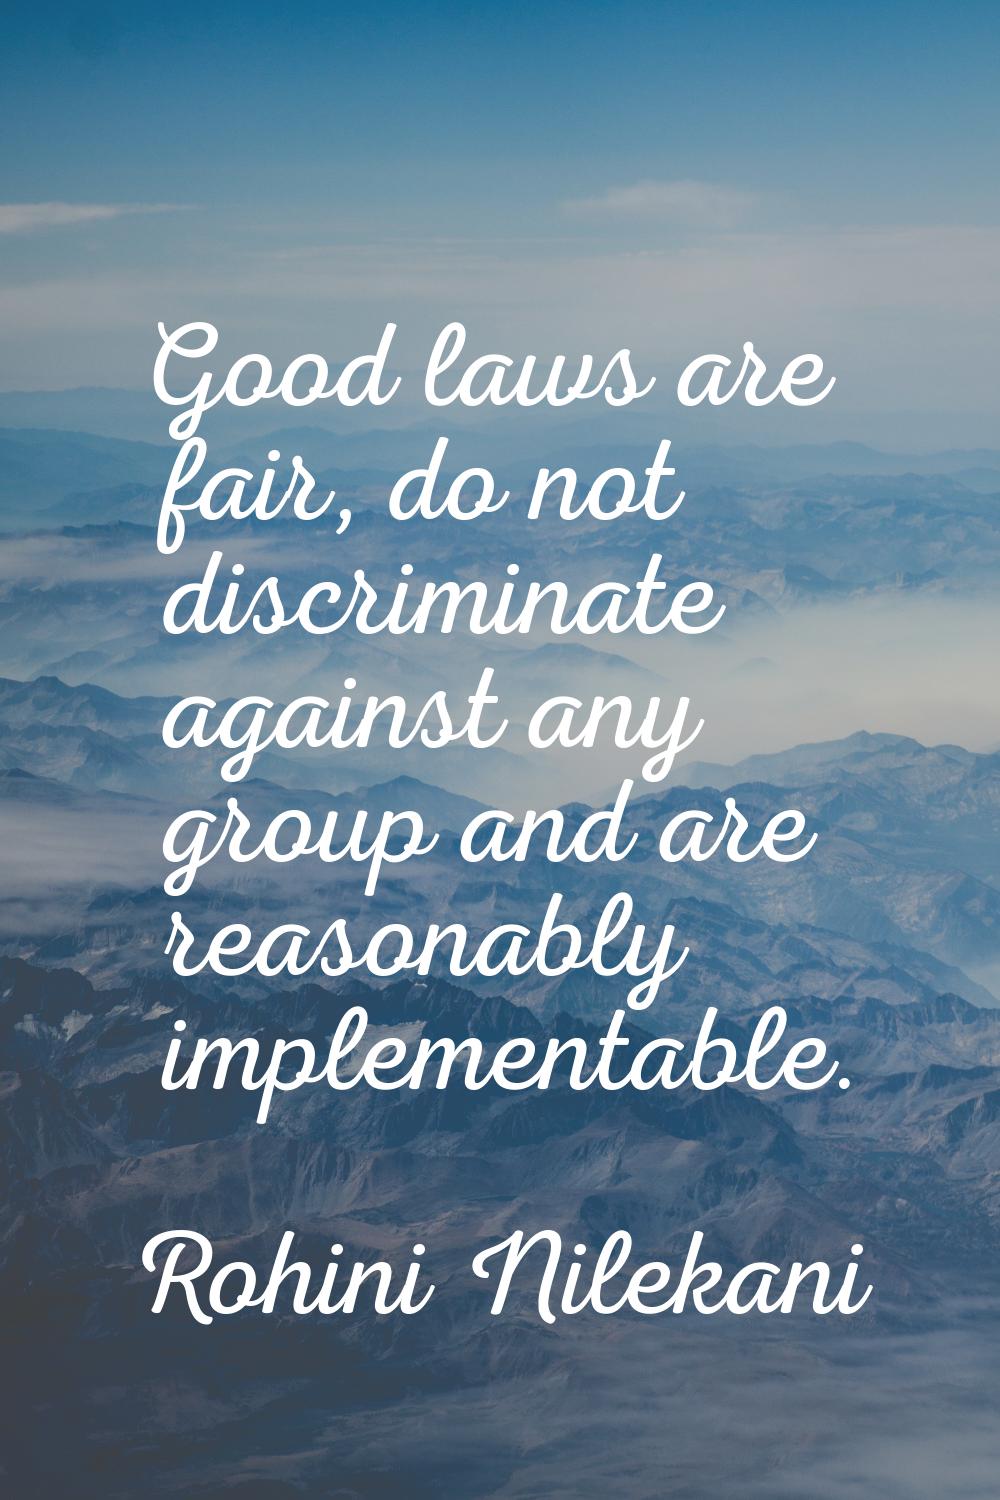 Good laws are fair, do not discriminate against any group and are reasonably implementable.